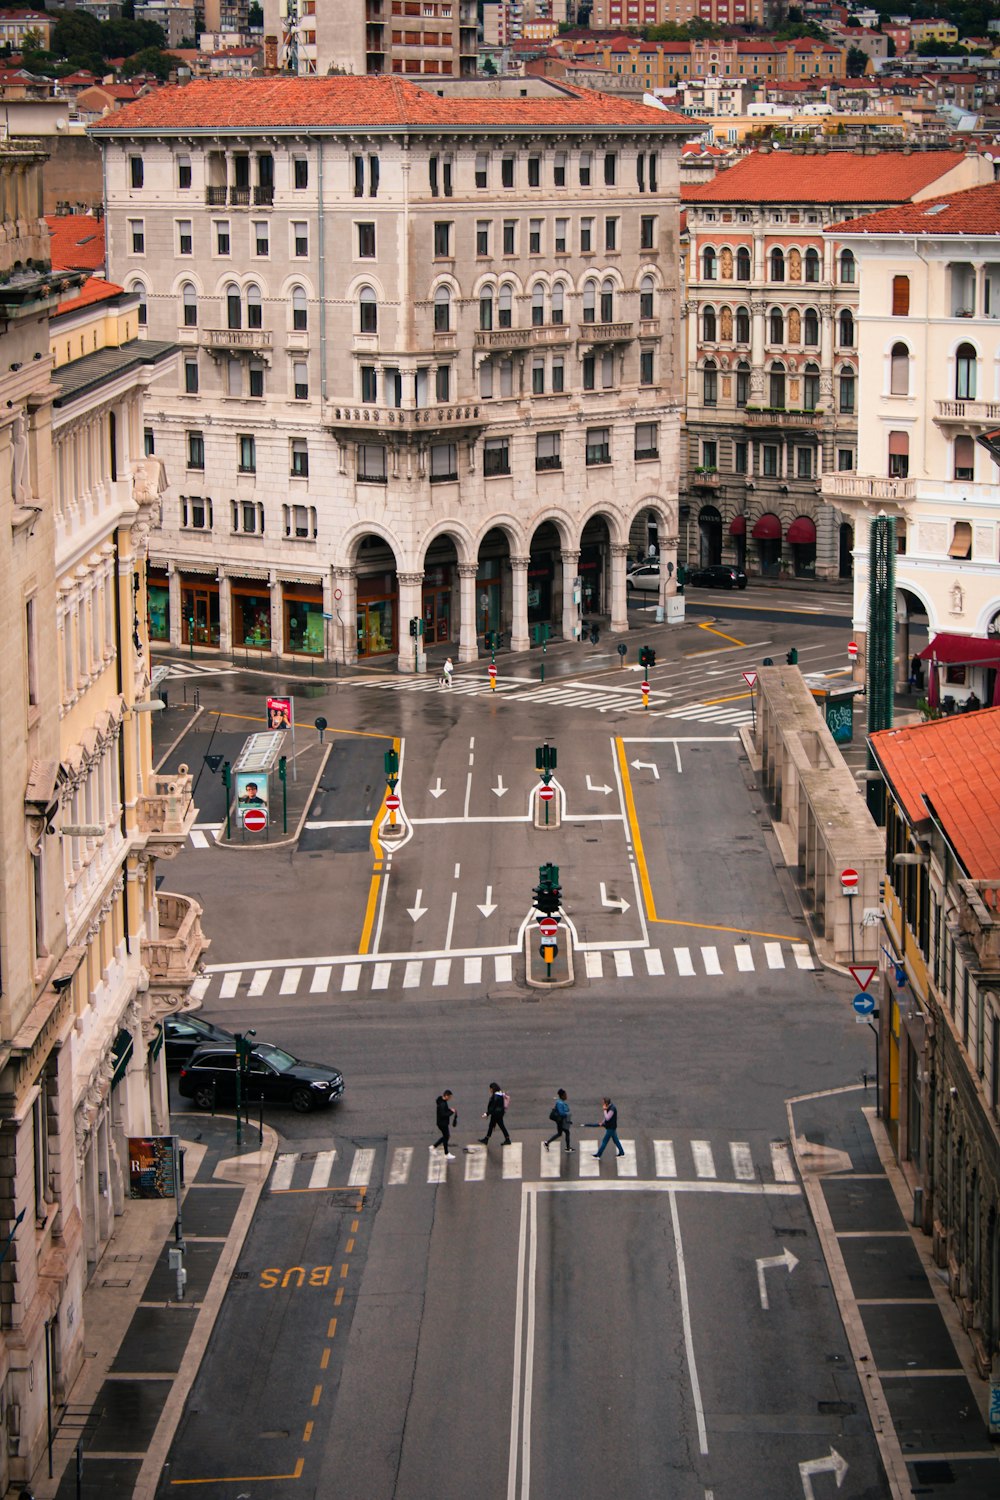 a view of a city intersection from above